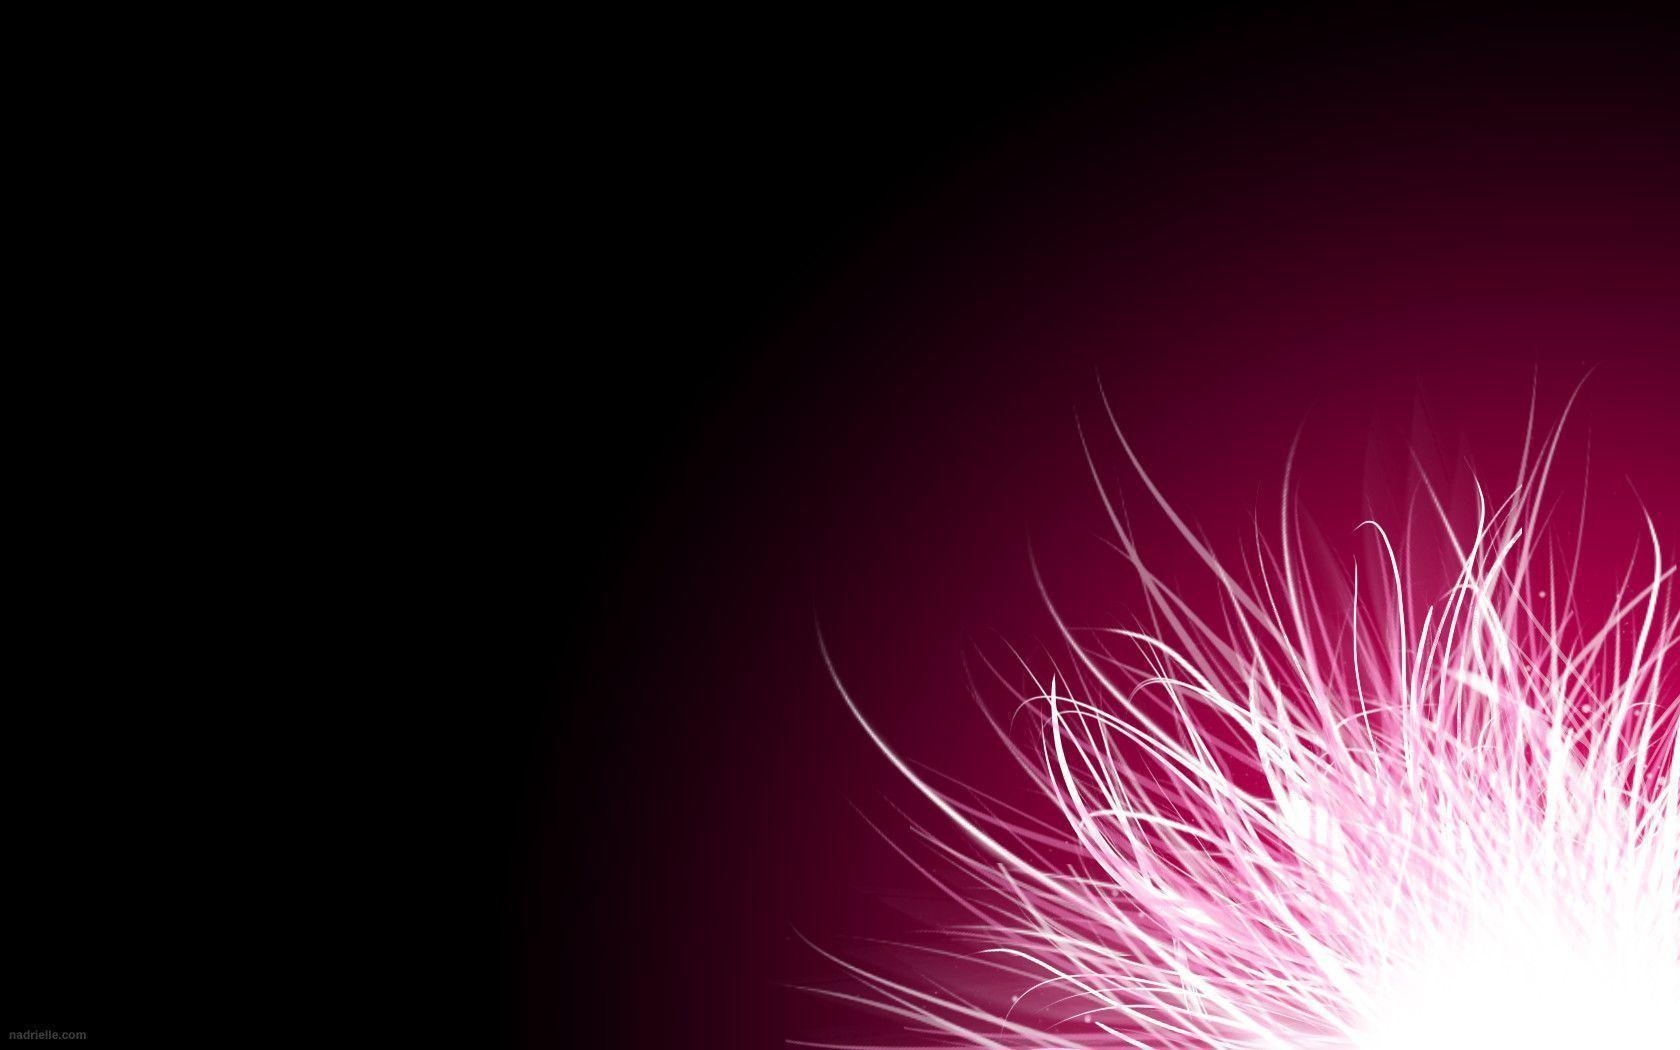 1680 x 1050 · jpeg - Awesome Pink Backgrounds - Wallpaper Cave